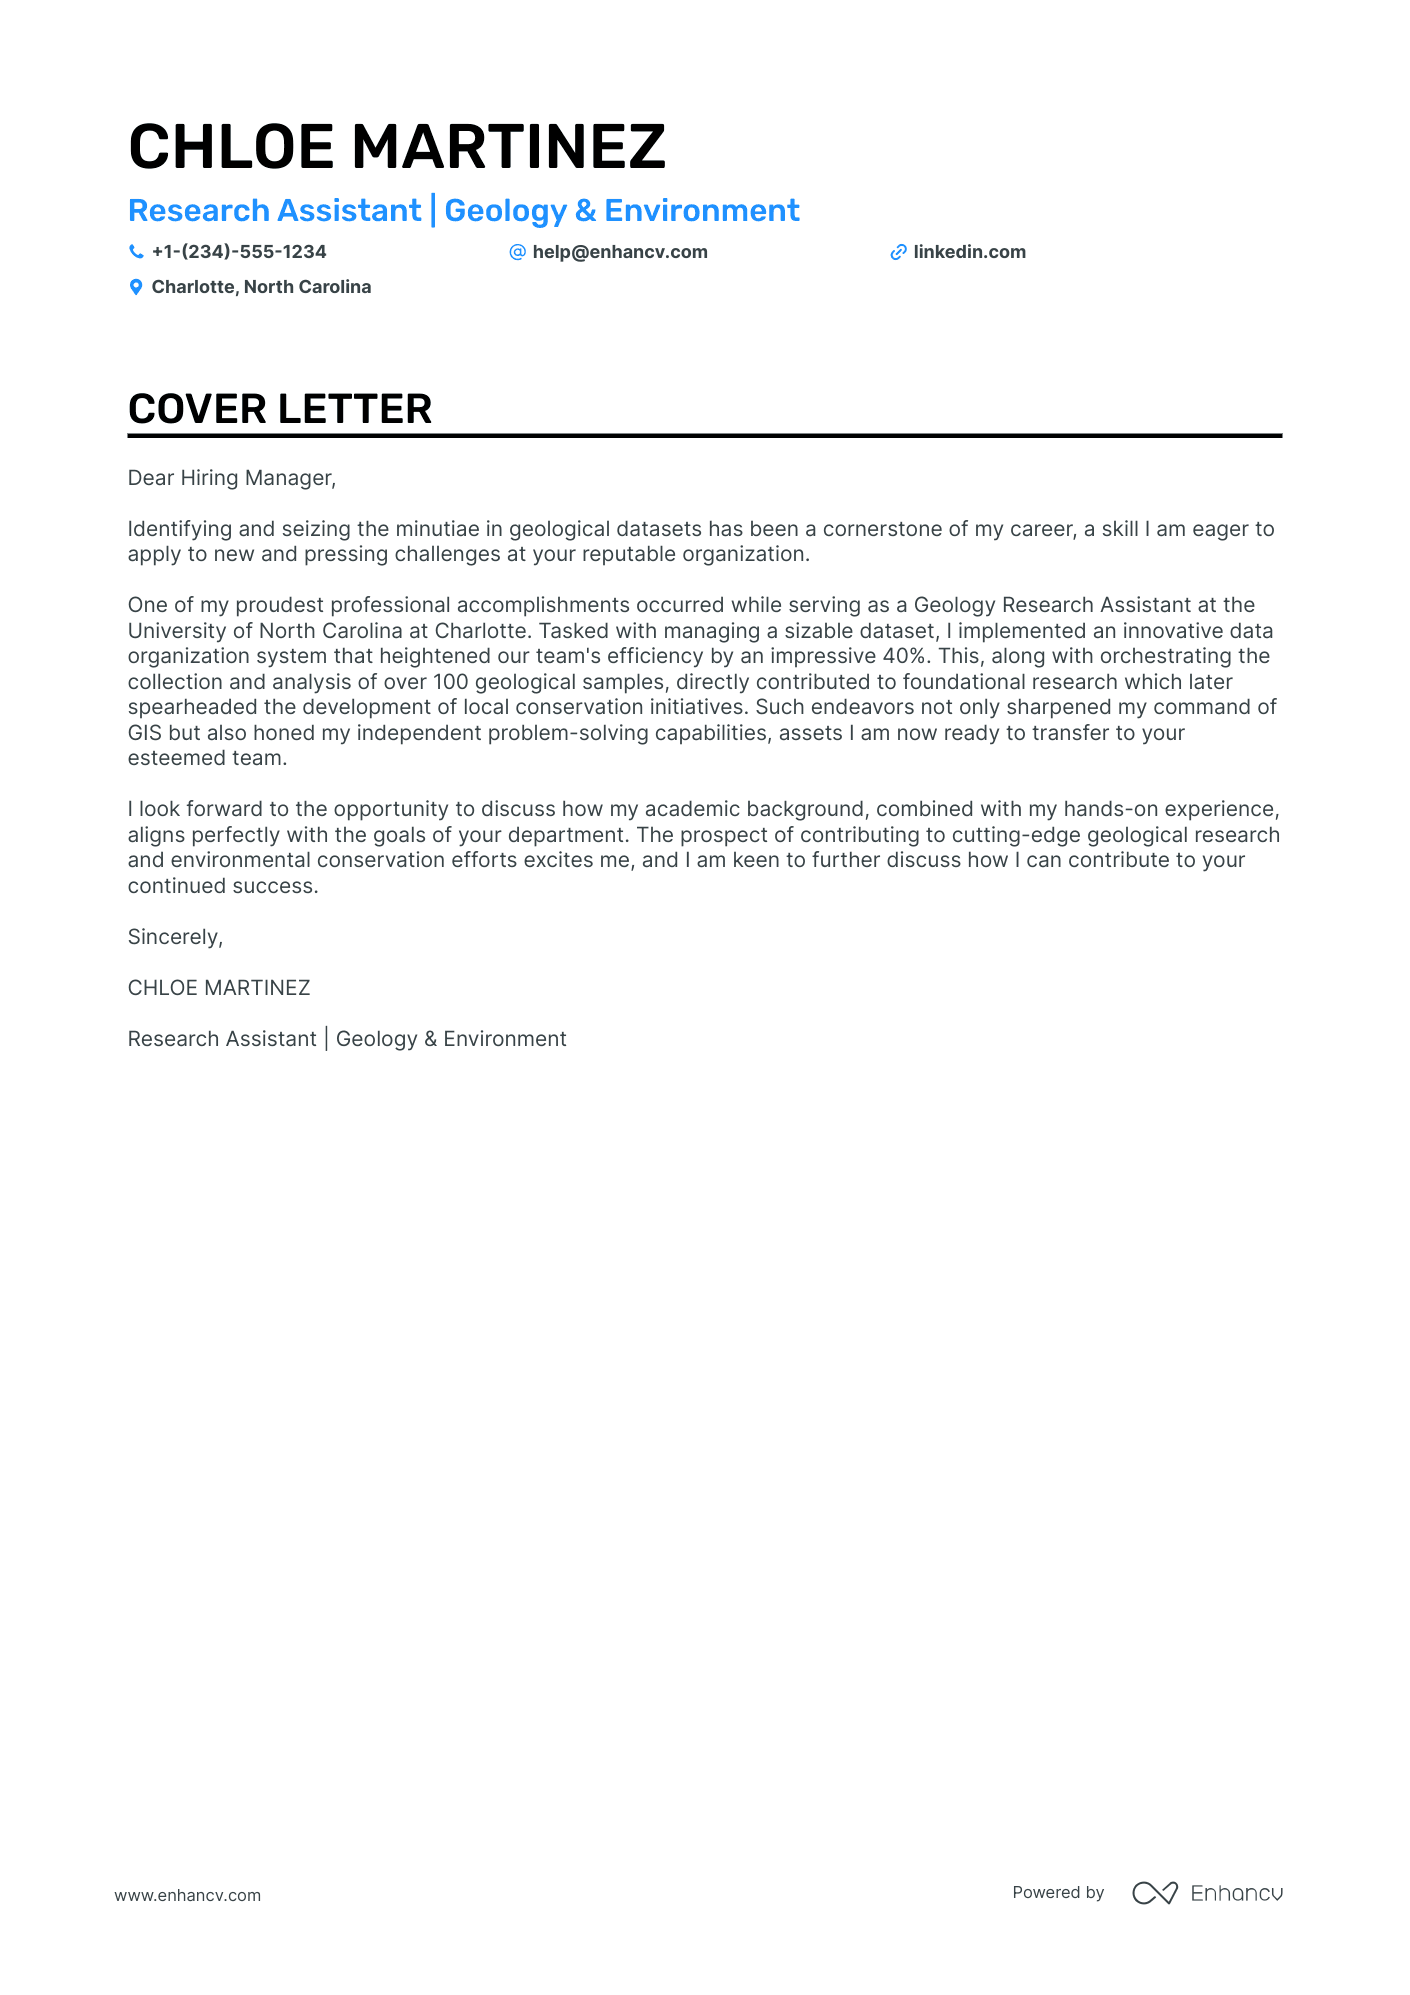 example cover letter for research assistant position